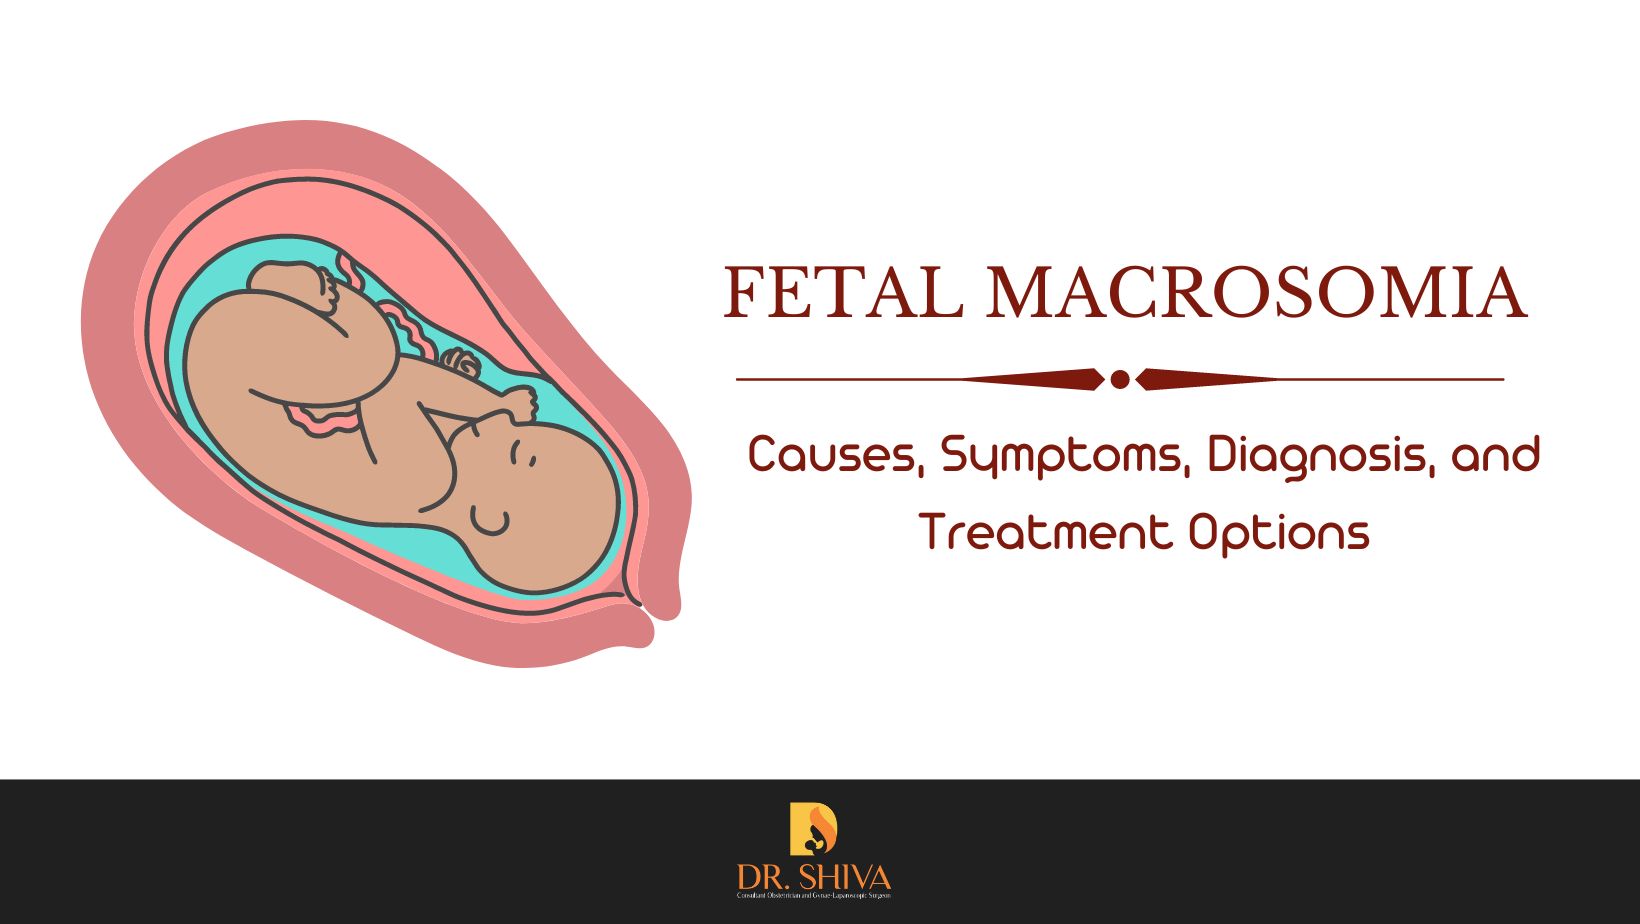 Fetal Macrosomia: Understanding the Causes, Symptoms, Diagnosis, and Treatment Options